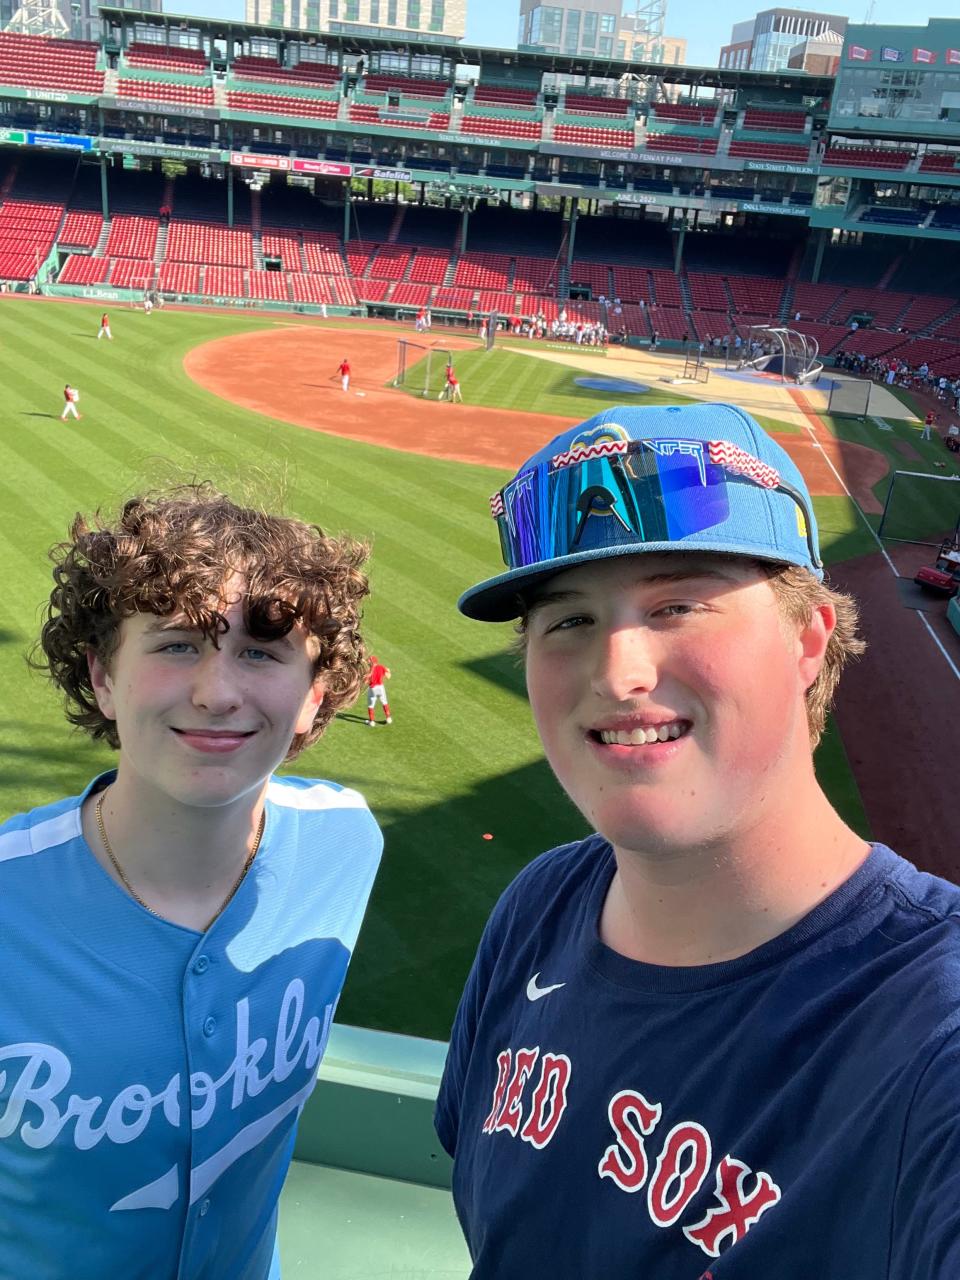 Aaron Buckley and his younger brother, Bryton, left, enjoyed a game Thursday night from atop the Green Monster at Fenway Park